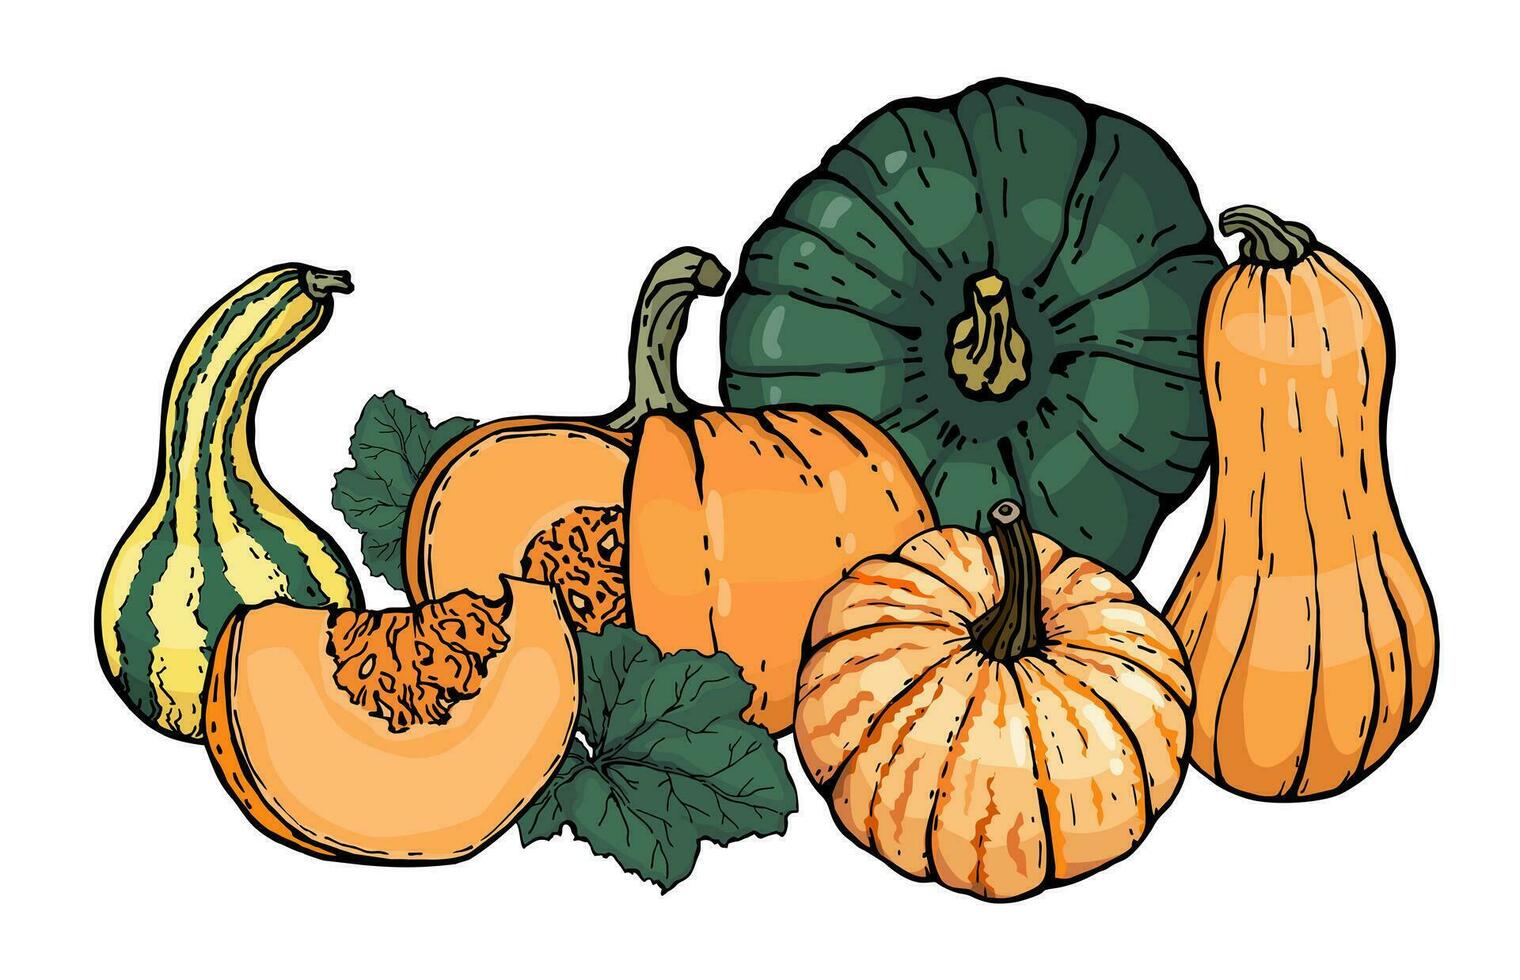 Pumpkin group. Pumpkins of various shapes, colors and characters, hand-drawn. Sketch. Vector illustrated clipart.